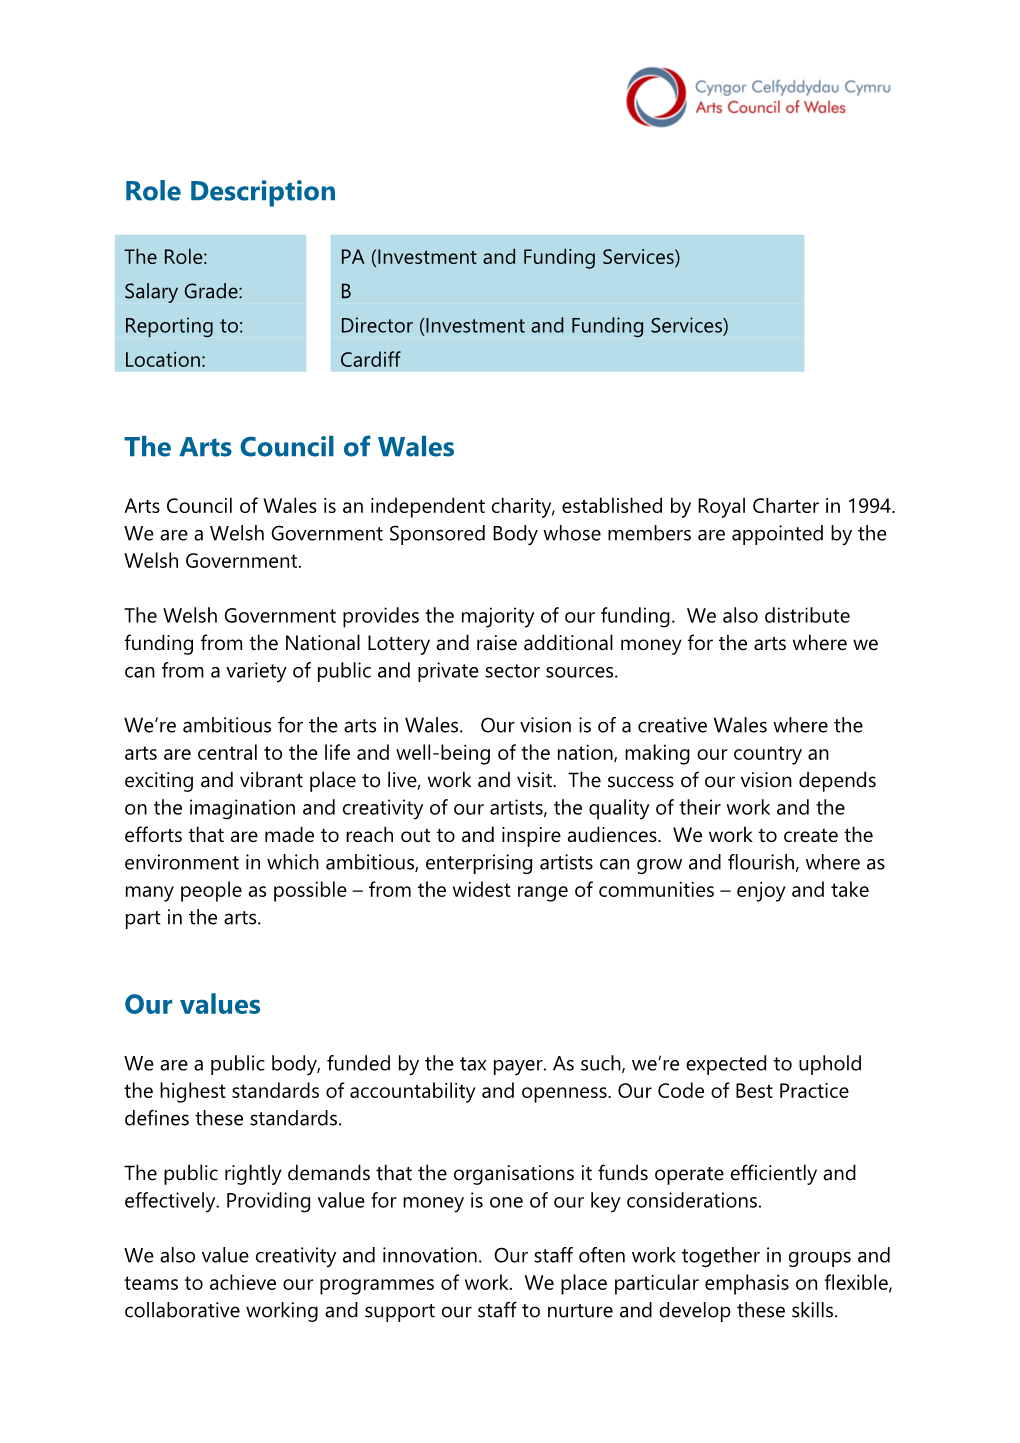 The Arts Council of Wales